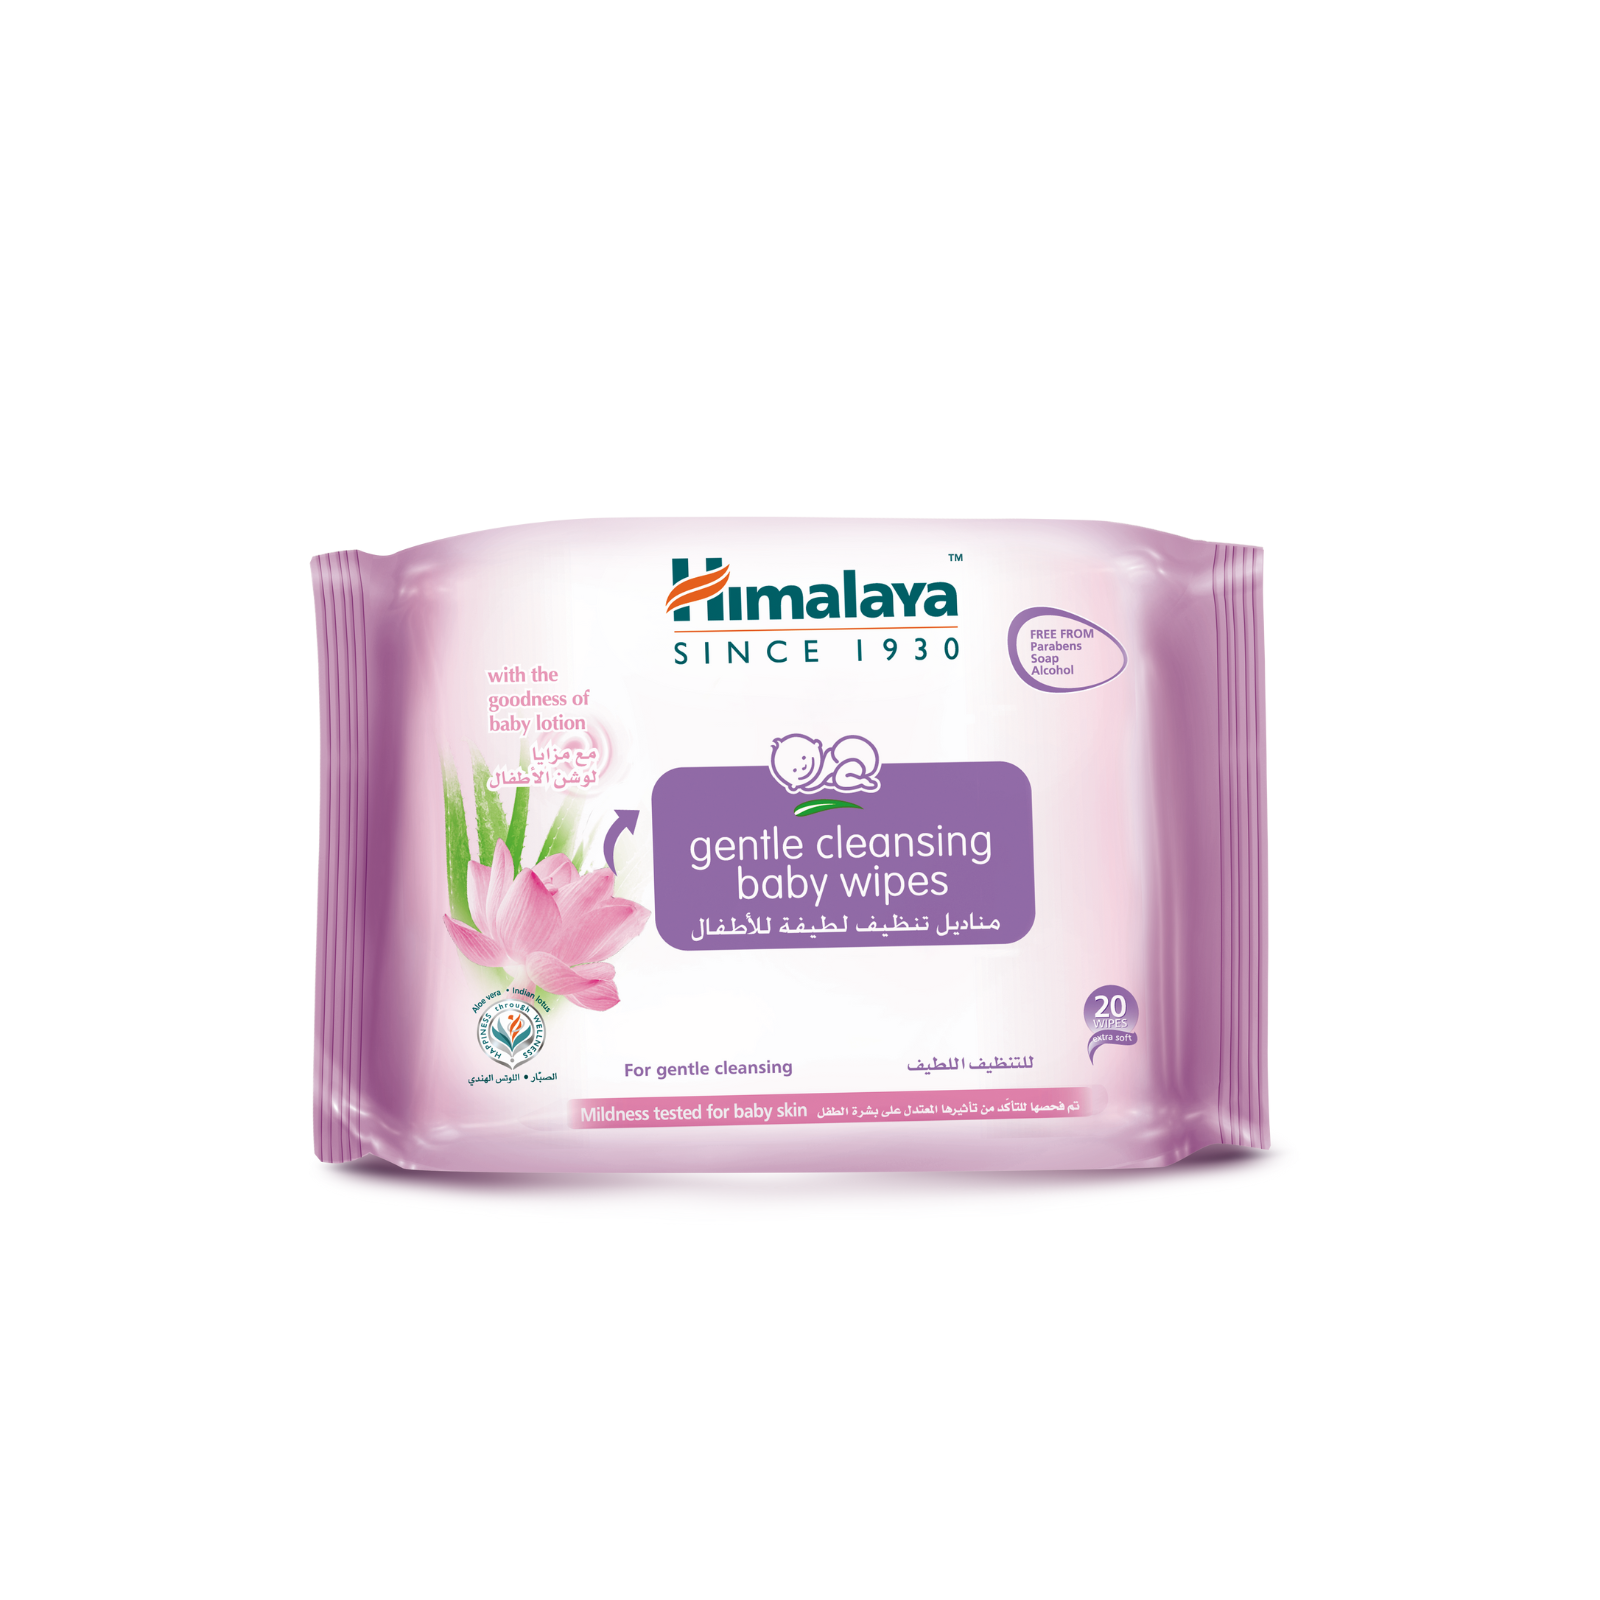 Gentle Cleansing Baby Wipes 20Pcs